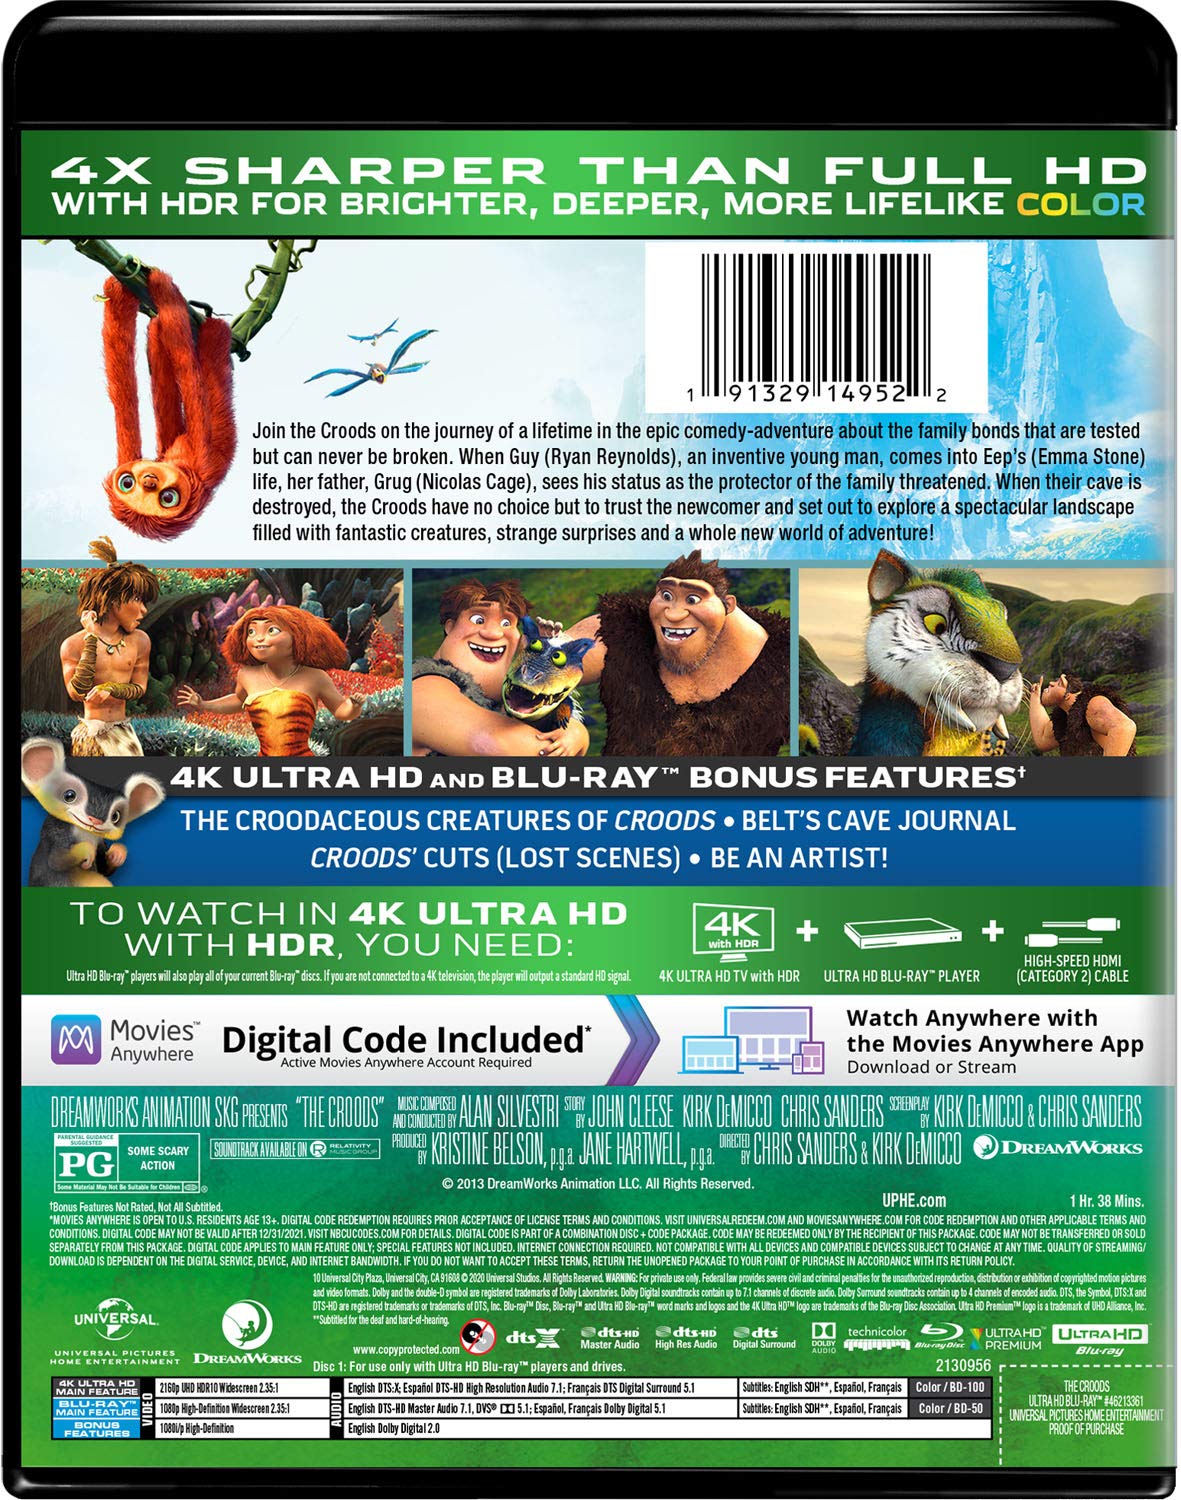 The Croods 4k Blu-ray back